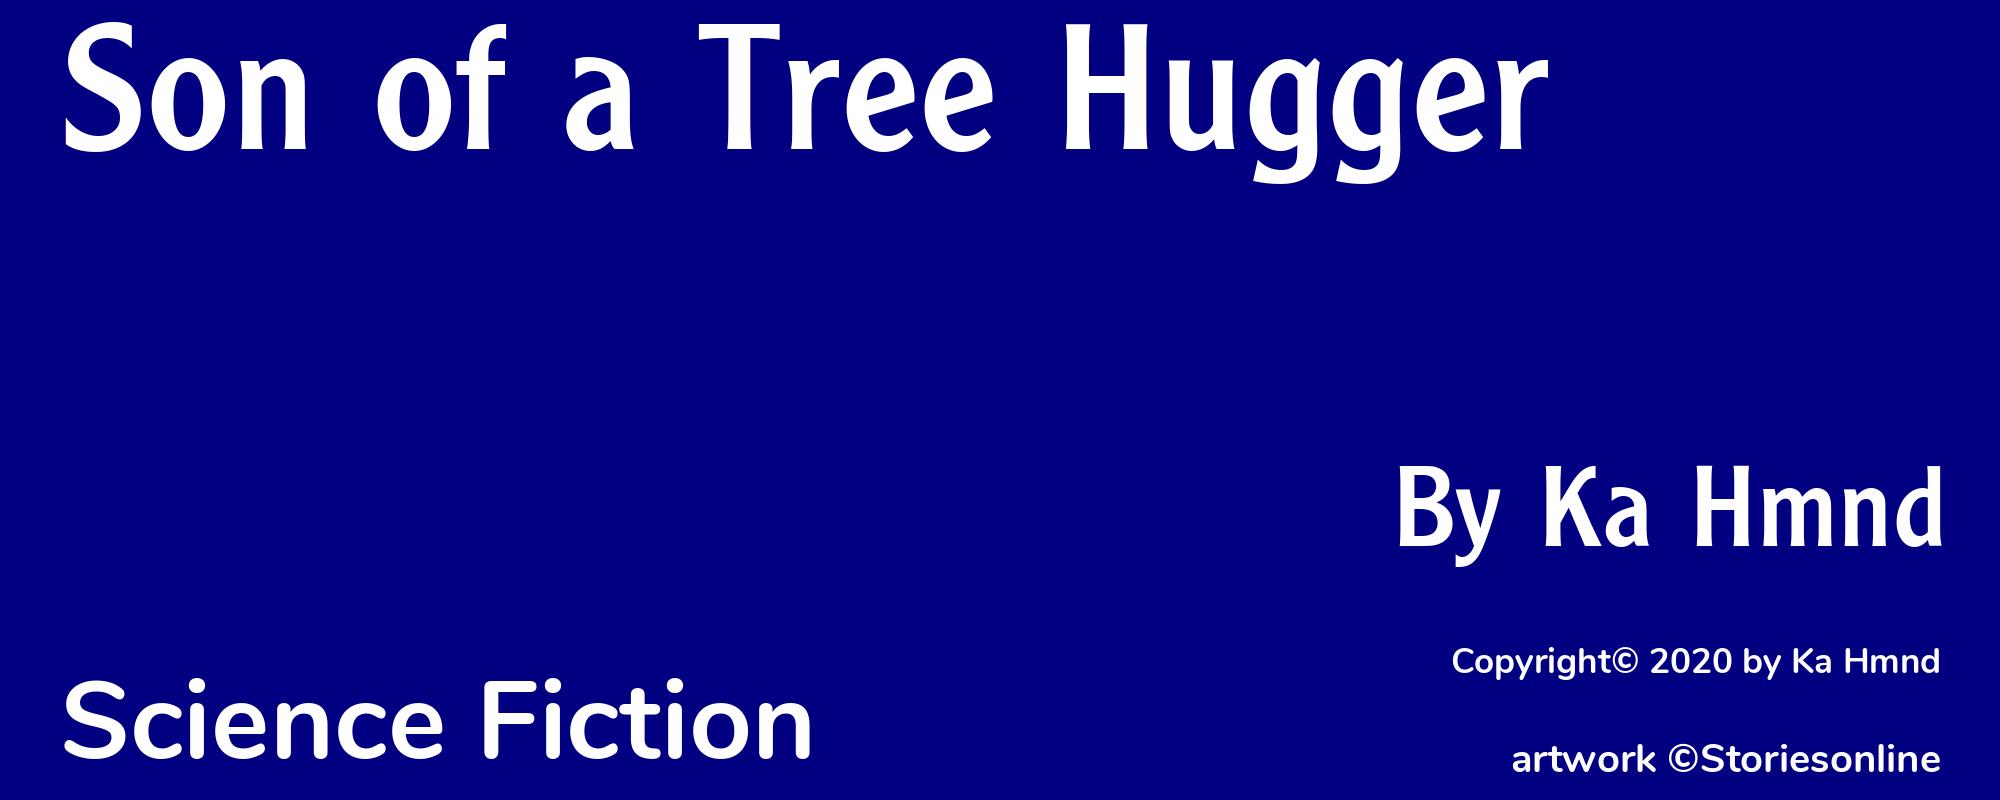 Son of a Tree Hugger - Cover